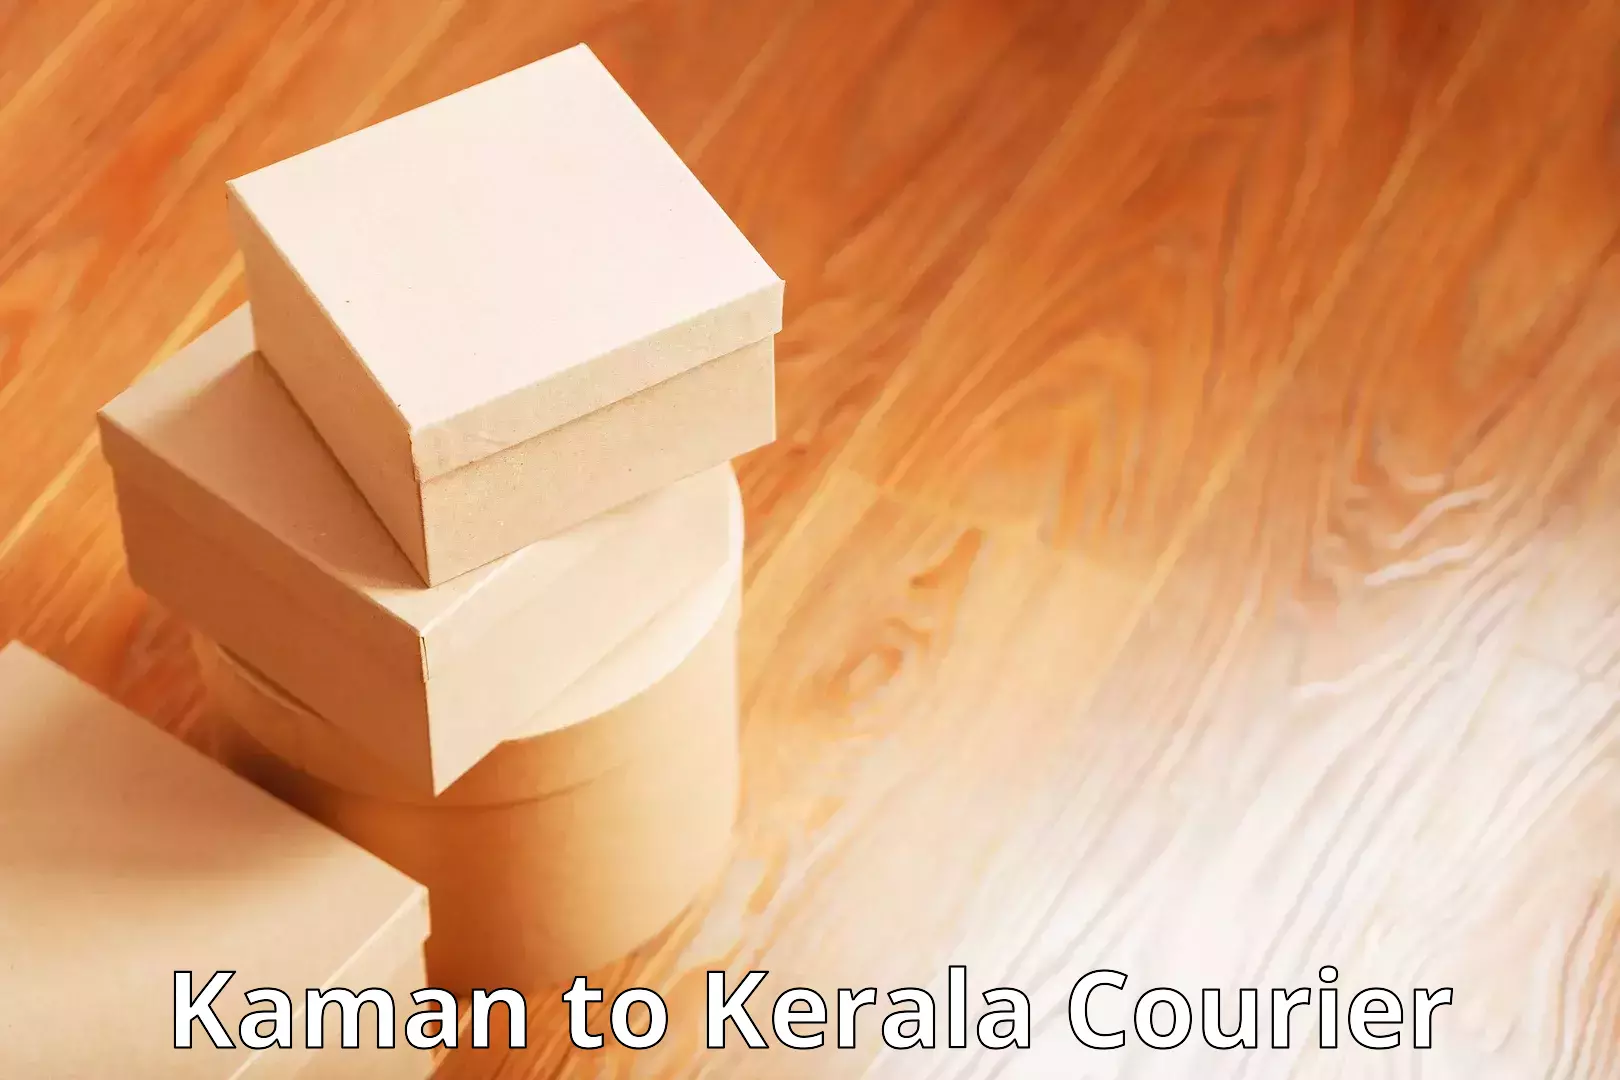 State-of-the-art courier technology Kaman to Kunnamkulam